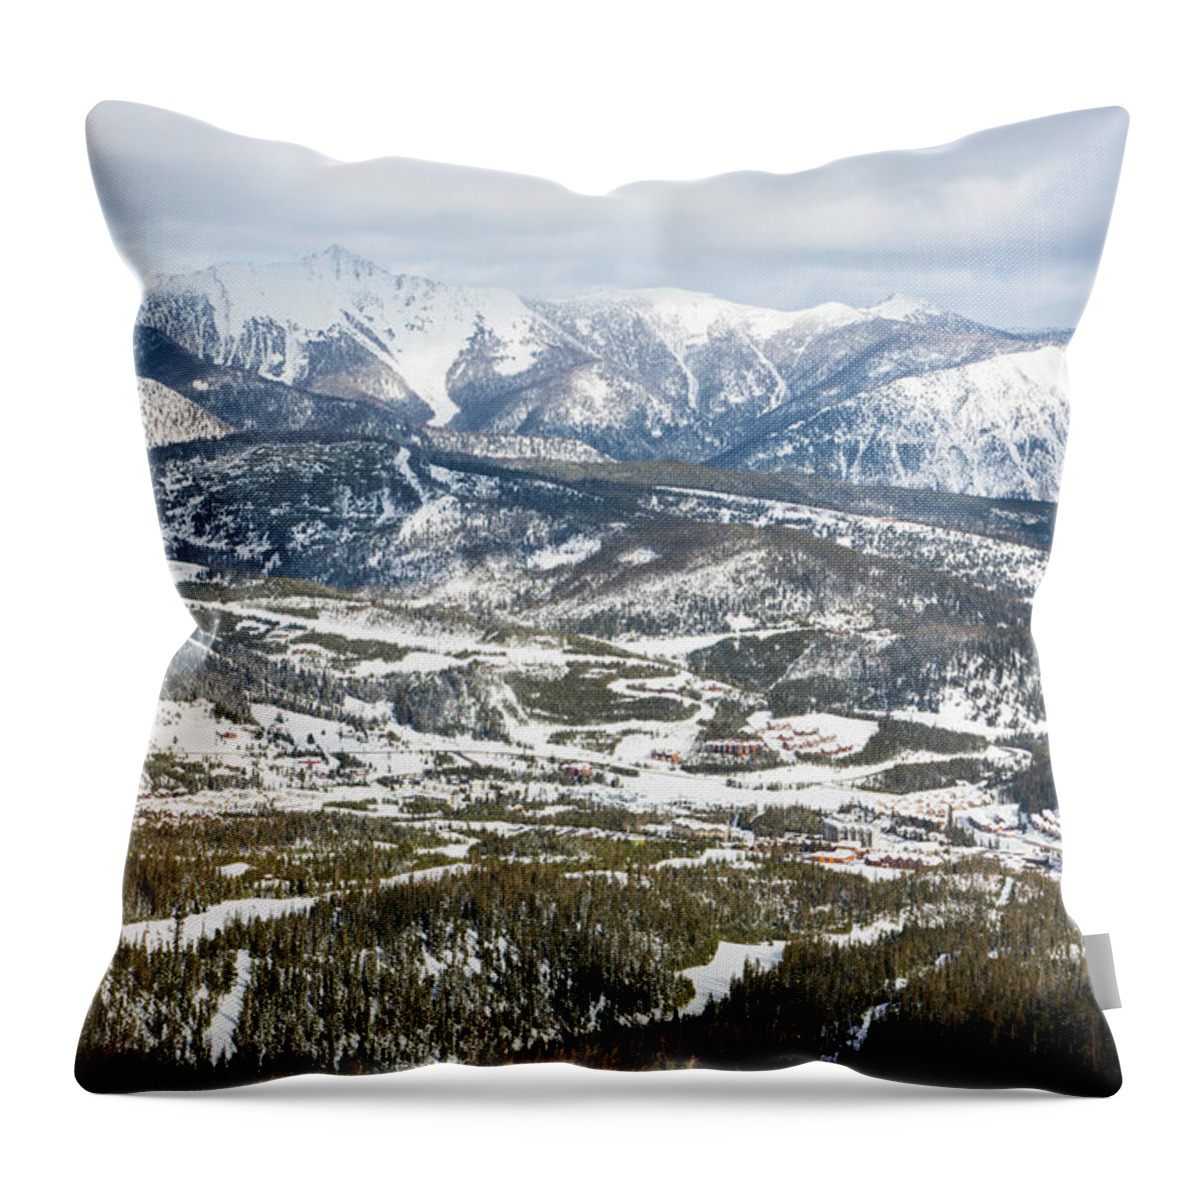 Beauty In Nature Throw Pillow featuring the photograph Big Sky Resort The Largest Ski Resort by Craig Moore